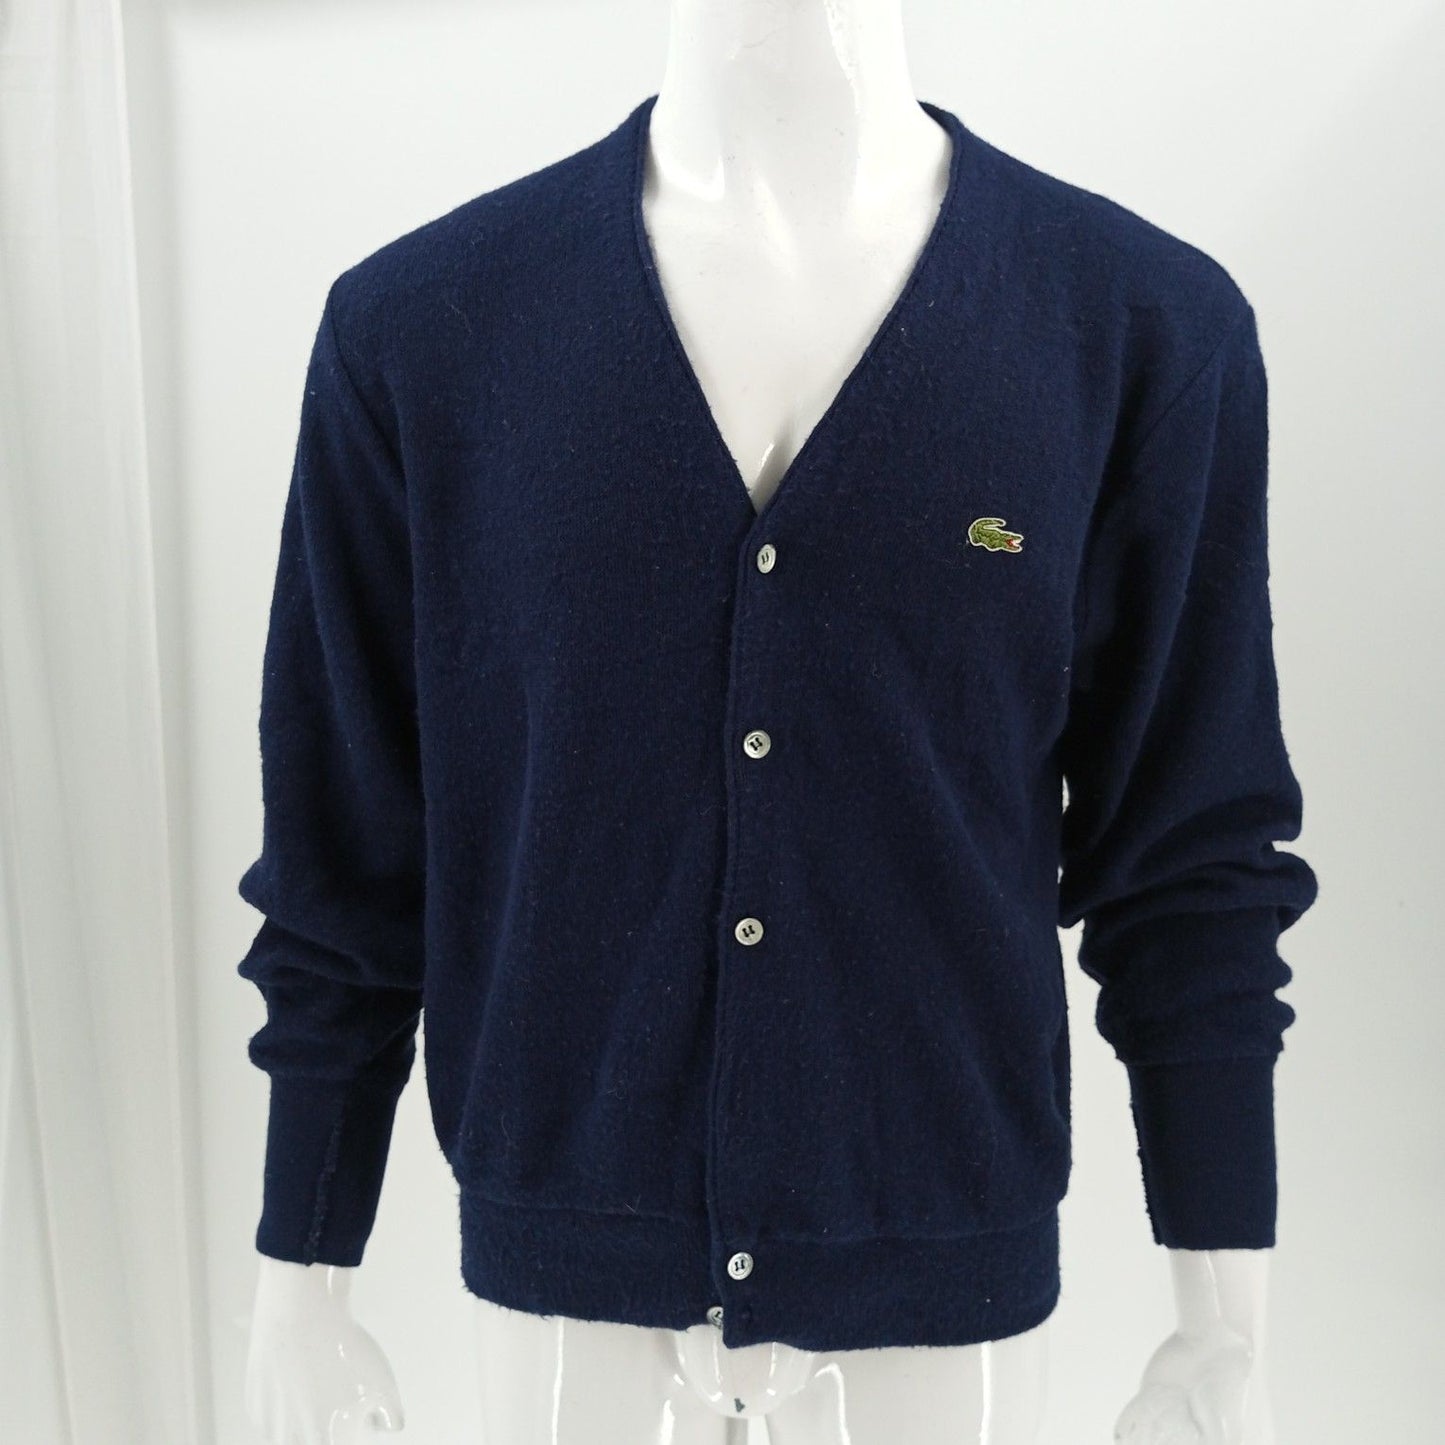 Lacoste and/or Chaps Jackets Box 17 Count